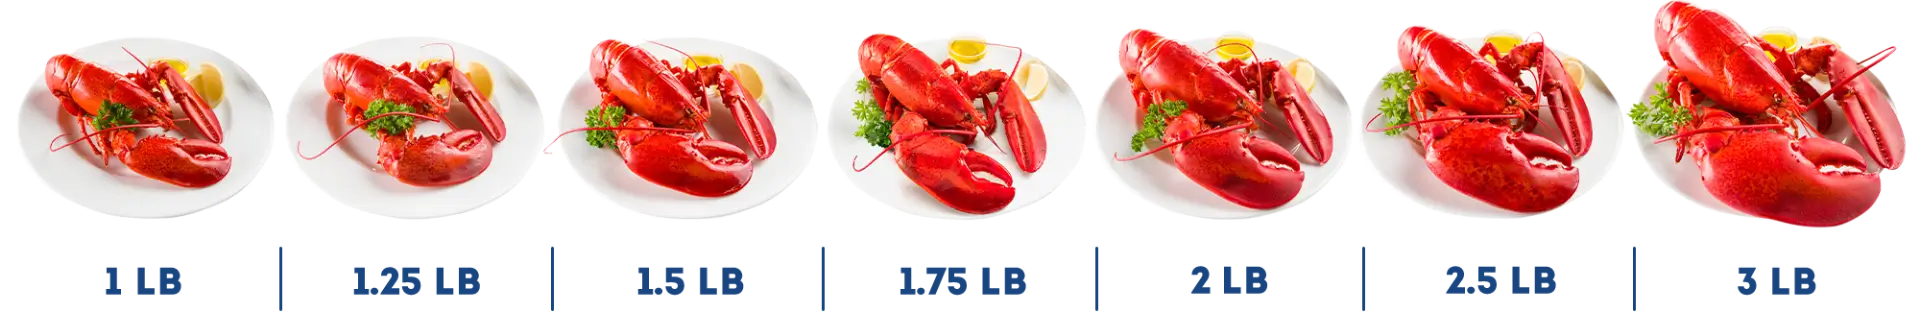 live maine lobster size chart